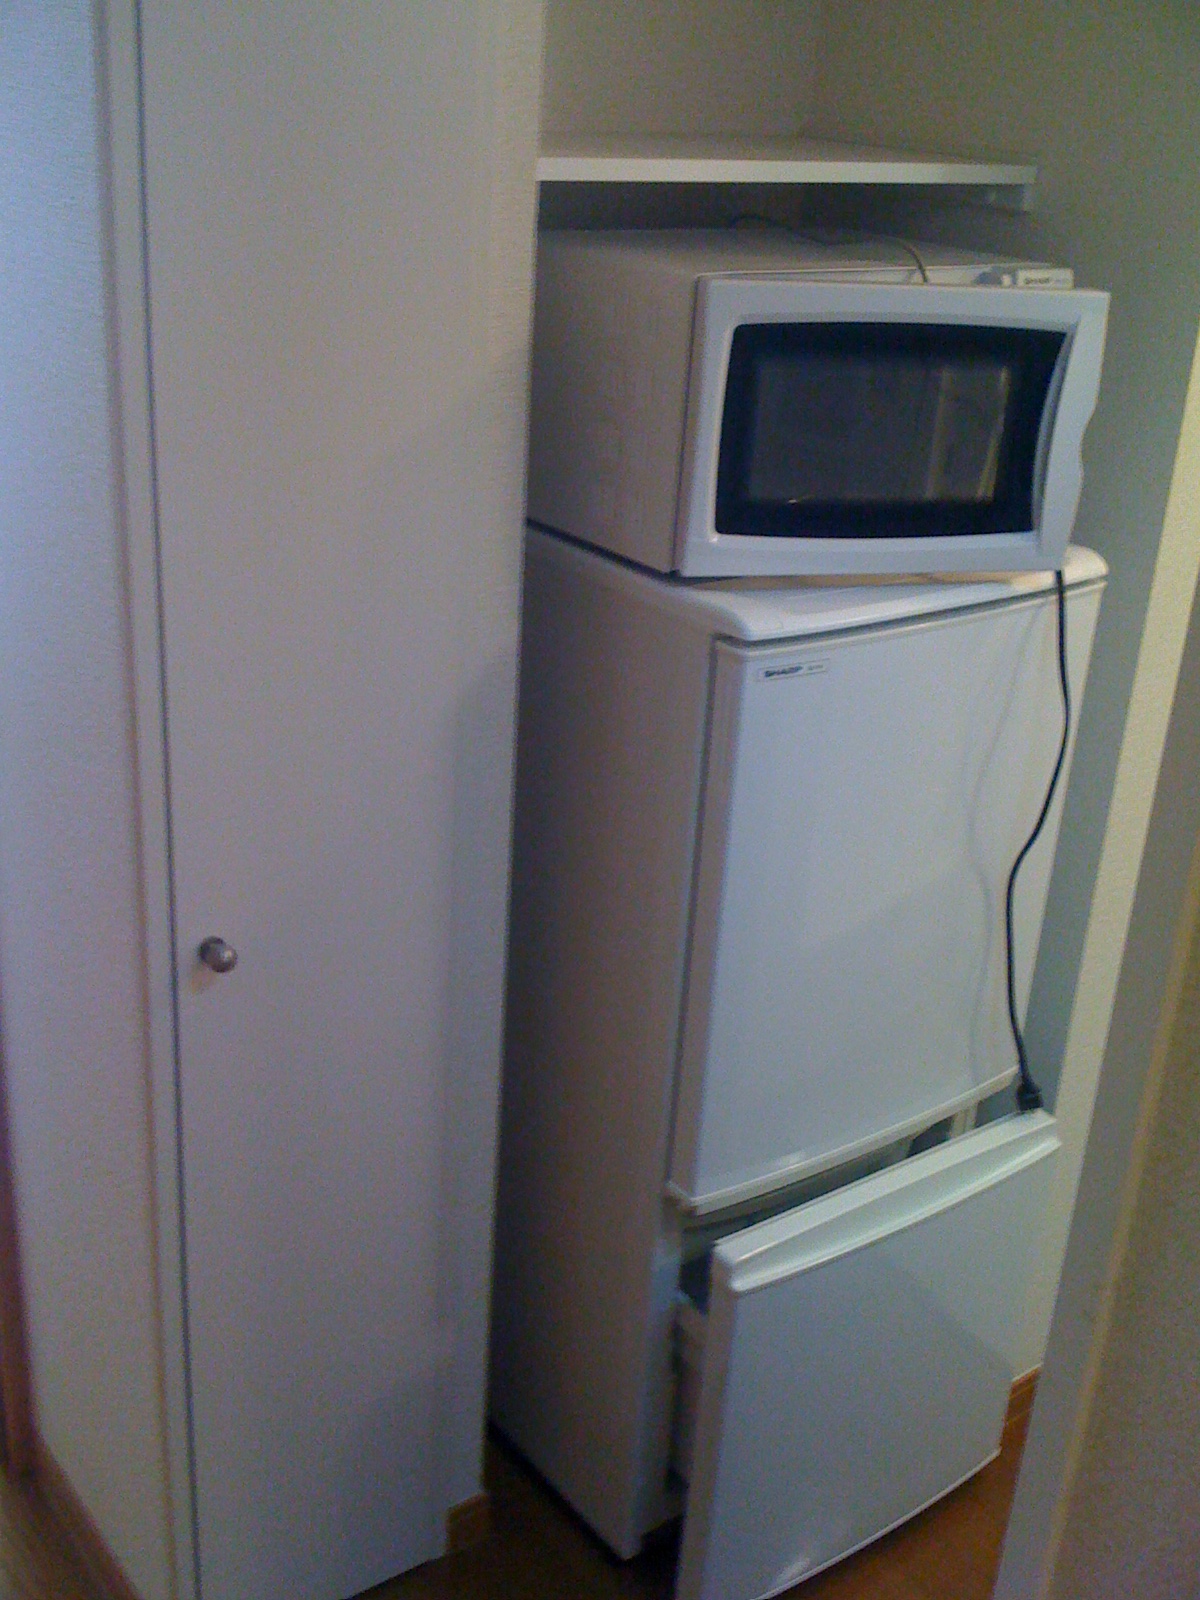 Other room space. Washing machine, TV, refrigerator, Microwave oven equipped